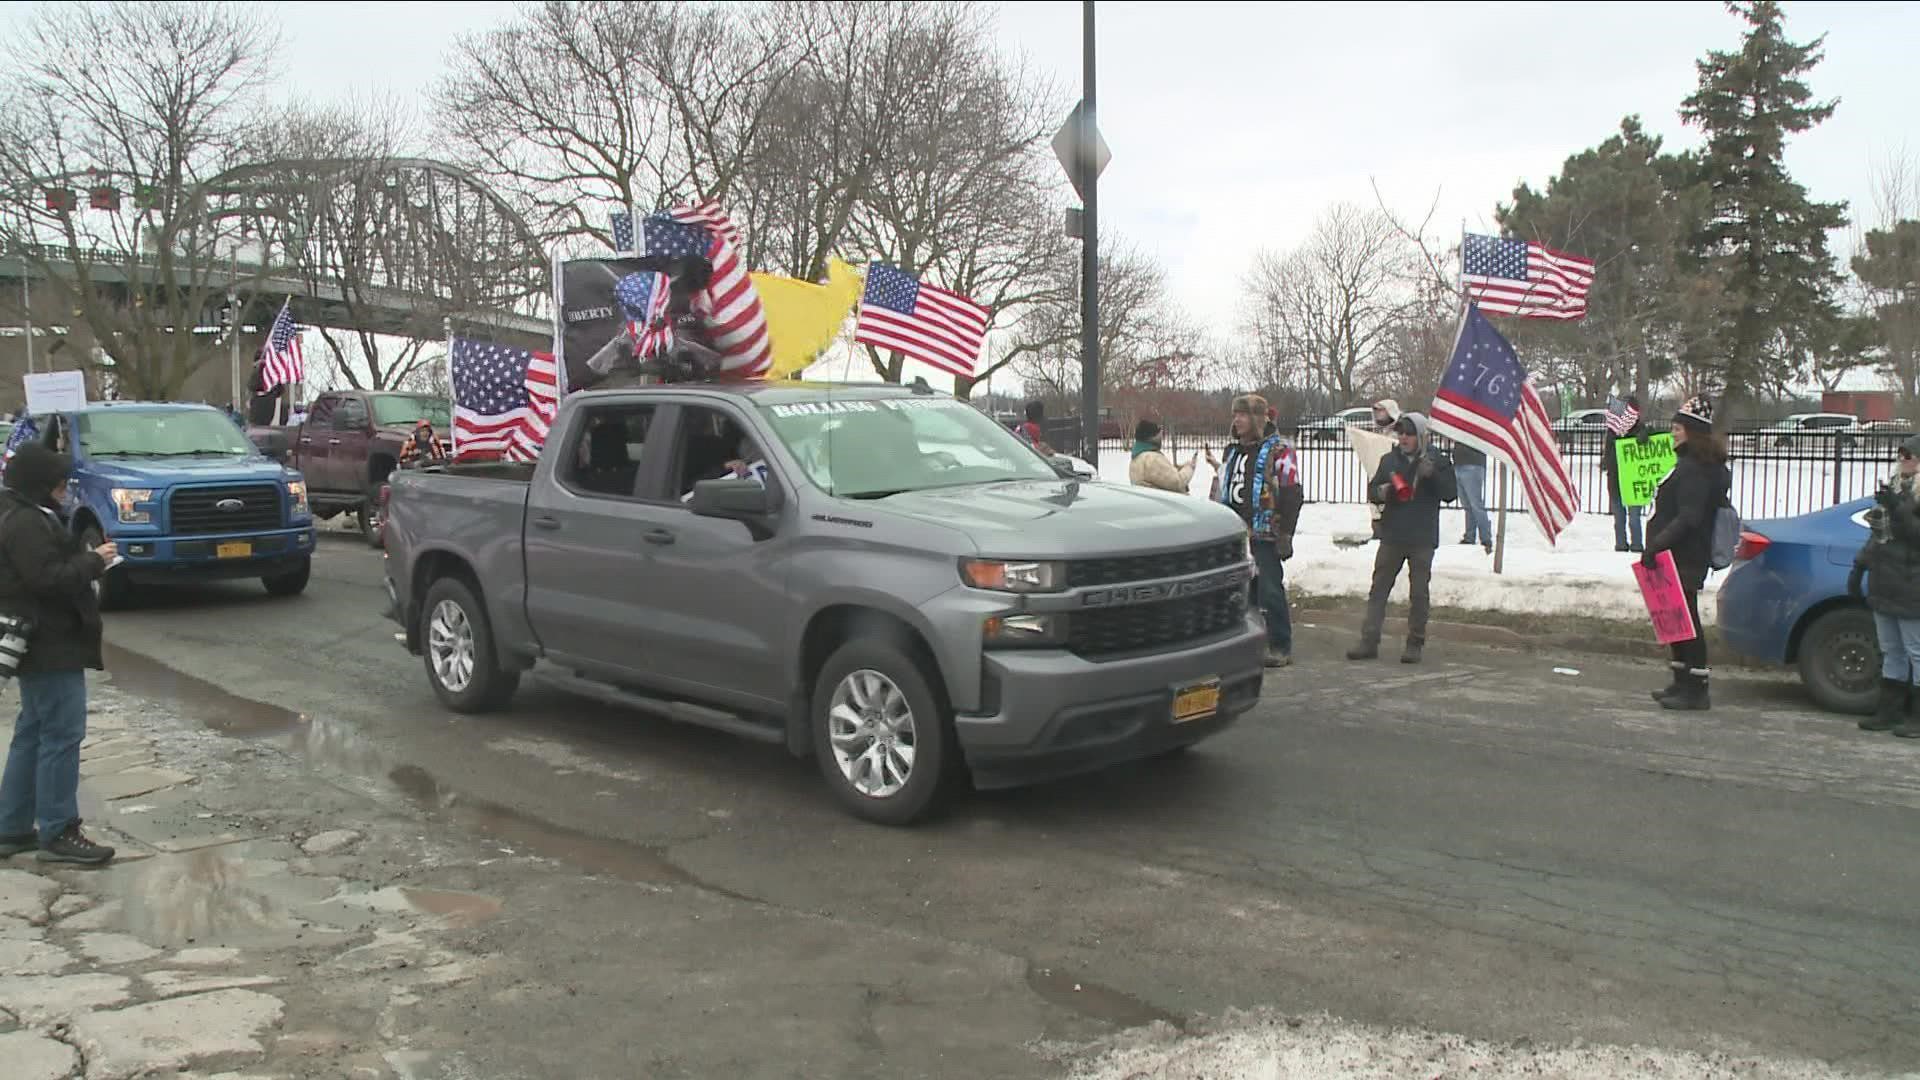 Protests from both sides of the border were happening Saturday in Buffalo and Fort Erie, Ontario.